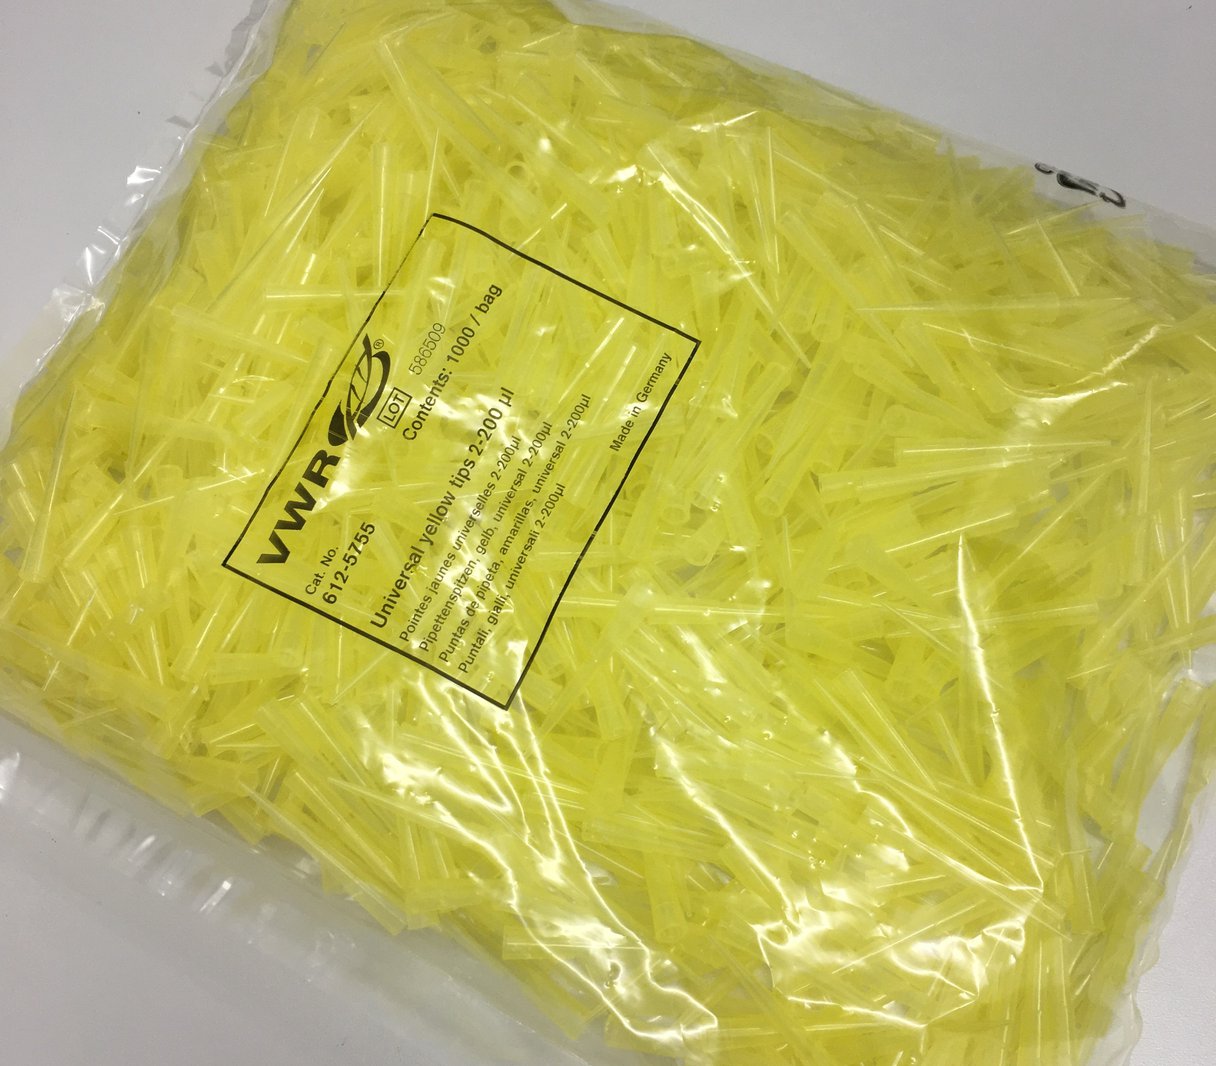 Yellow Pipette Tips - 200ul - Bag of 1000